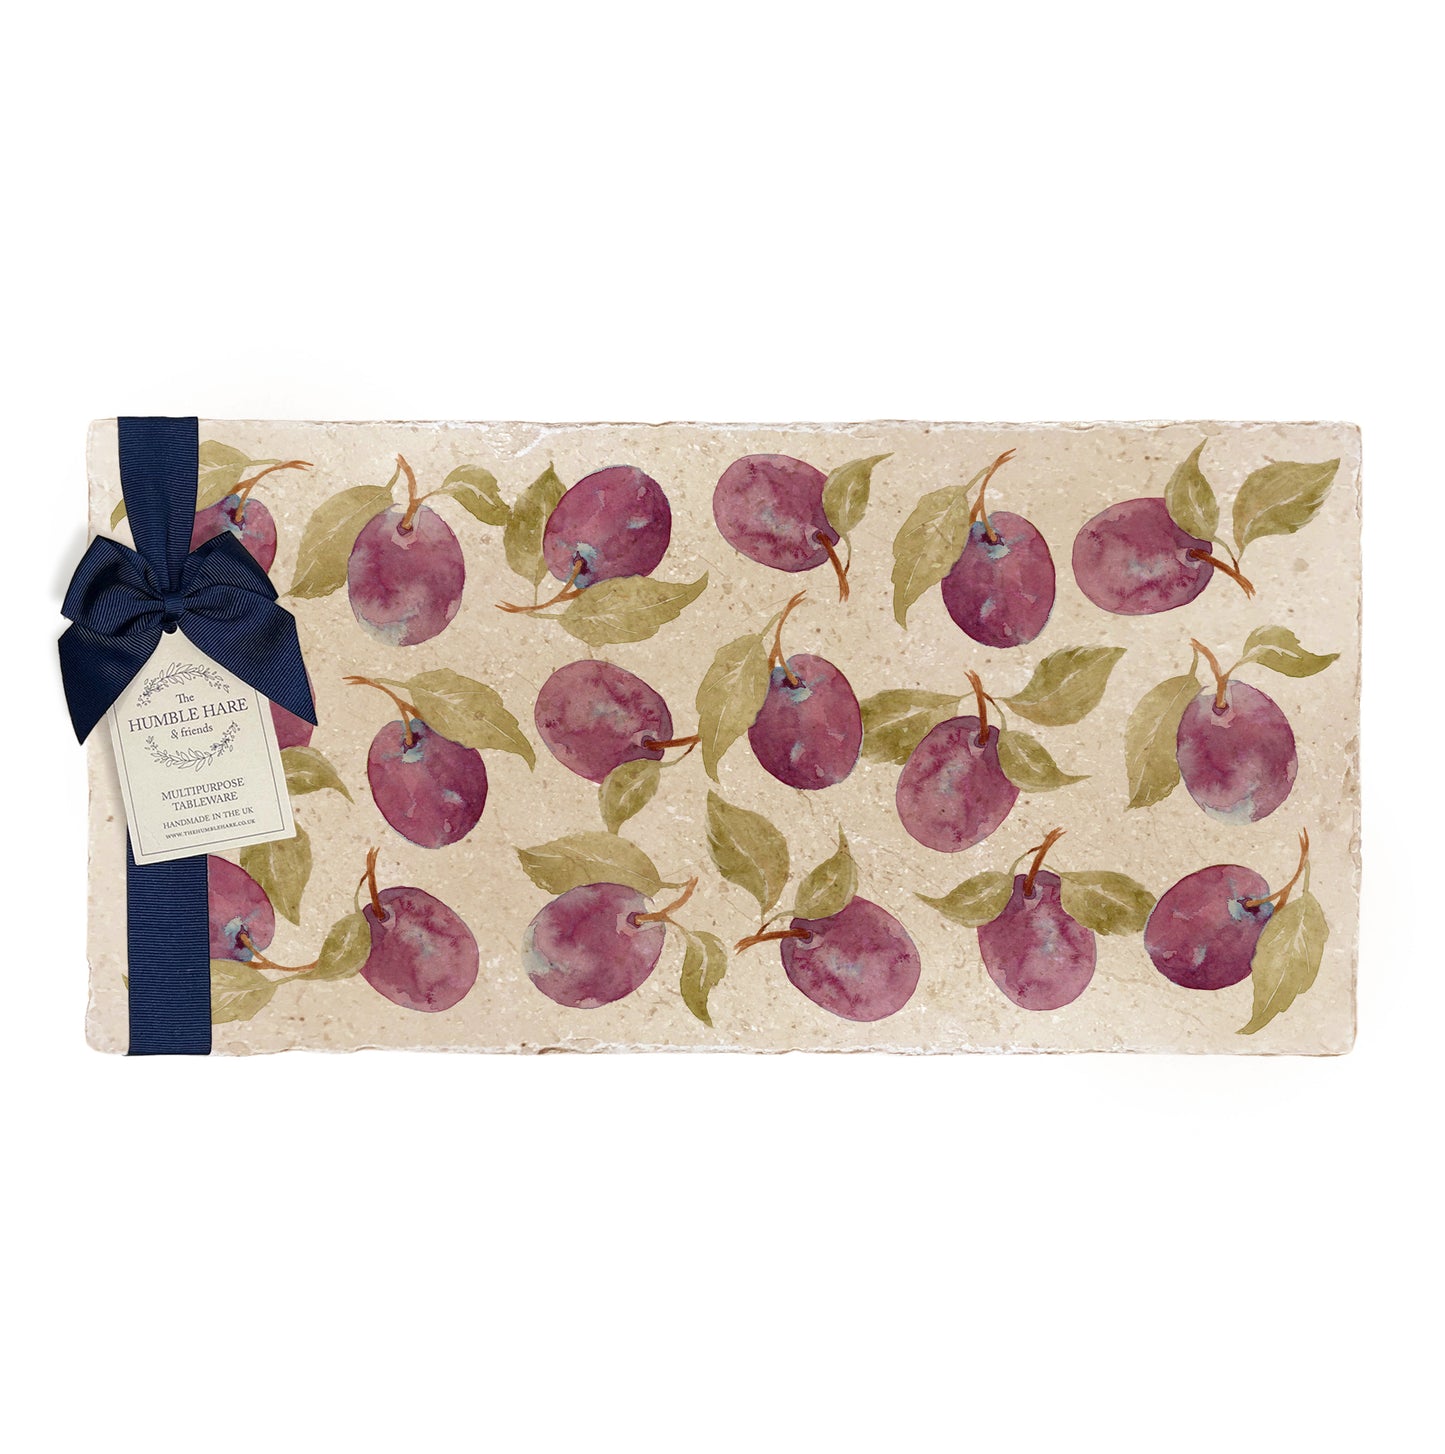 A multipurpose marble sharing platter with a watercolour plum pattern, packaged with a luxurious dark blue bow and branded gift tag.